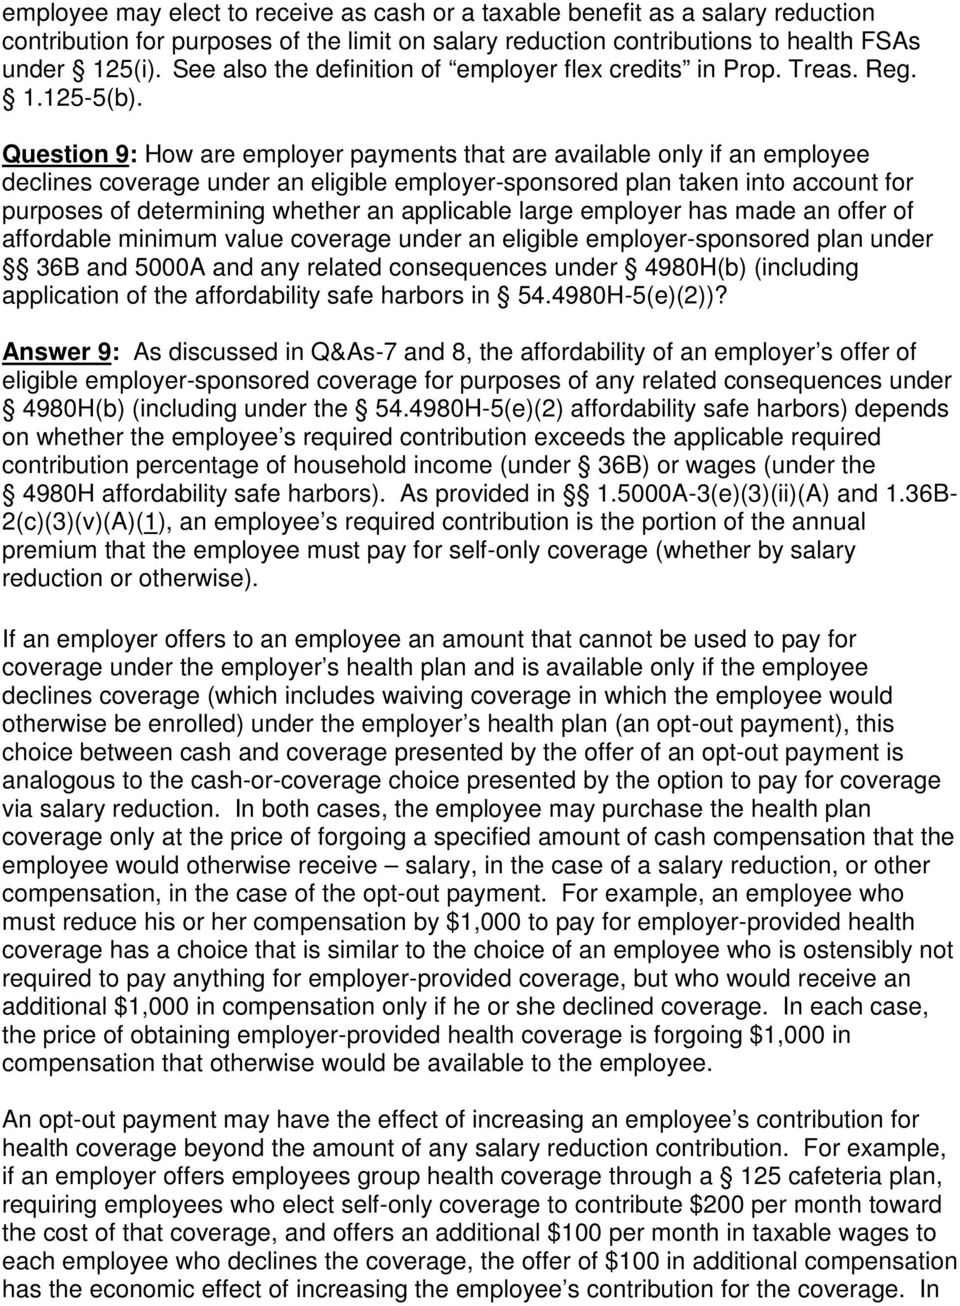 Question 9: How are employer payments that are available only if an employee declines coverage under an eligible employer-sponsored plan taken into account for purposes of determining whether an